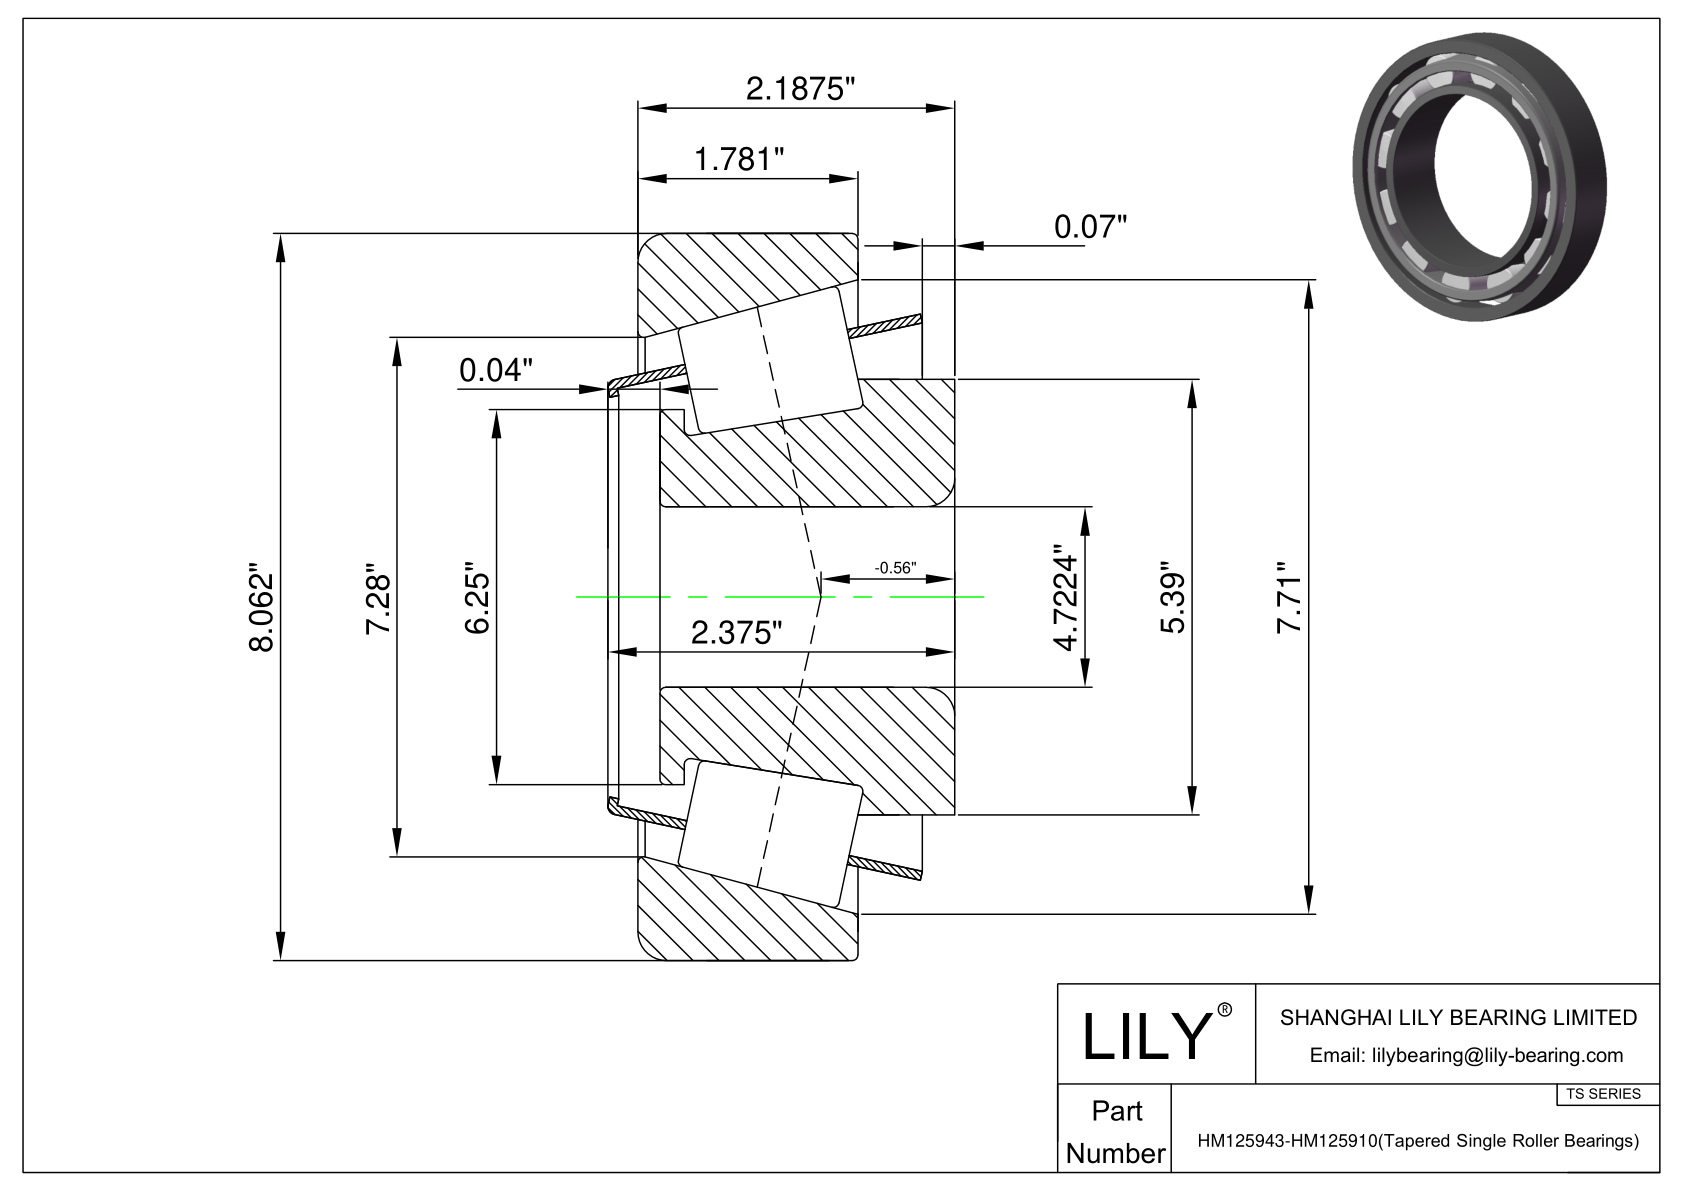 HM125943-HM125910 TS (Tapered Single Roller Bearings) (Imperial) cad drawing